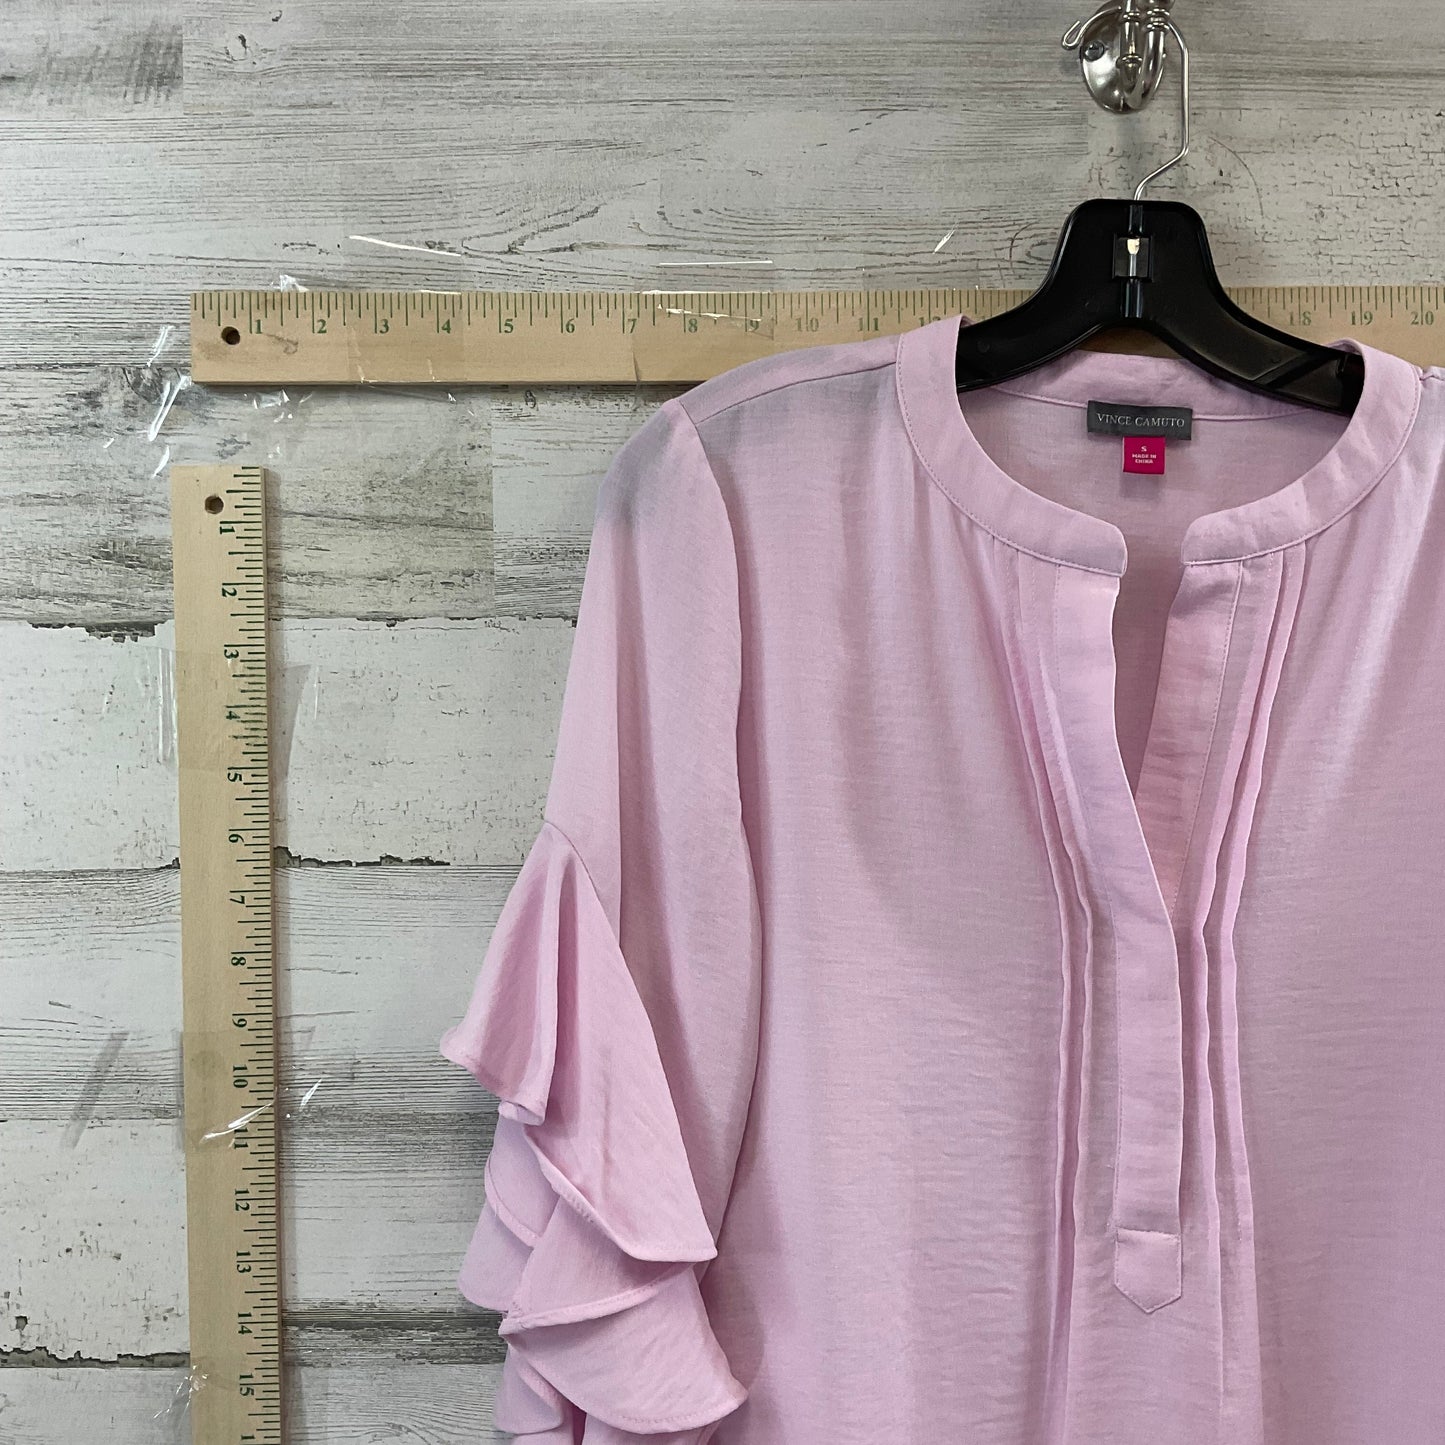 Pink Top 3/4 Sleeve Vince Camuto, Size S